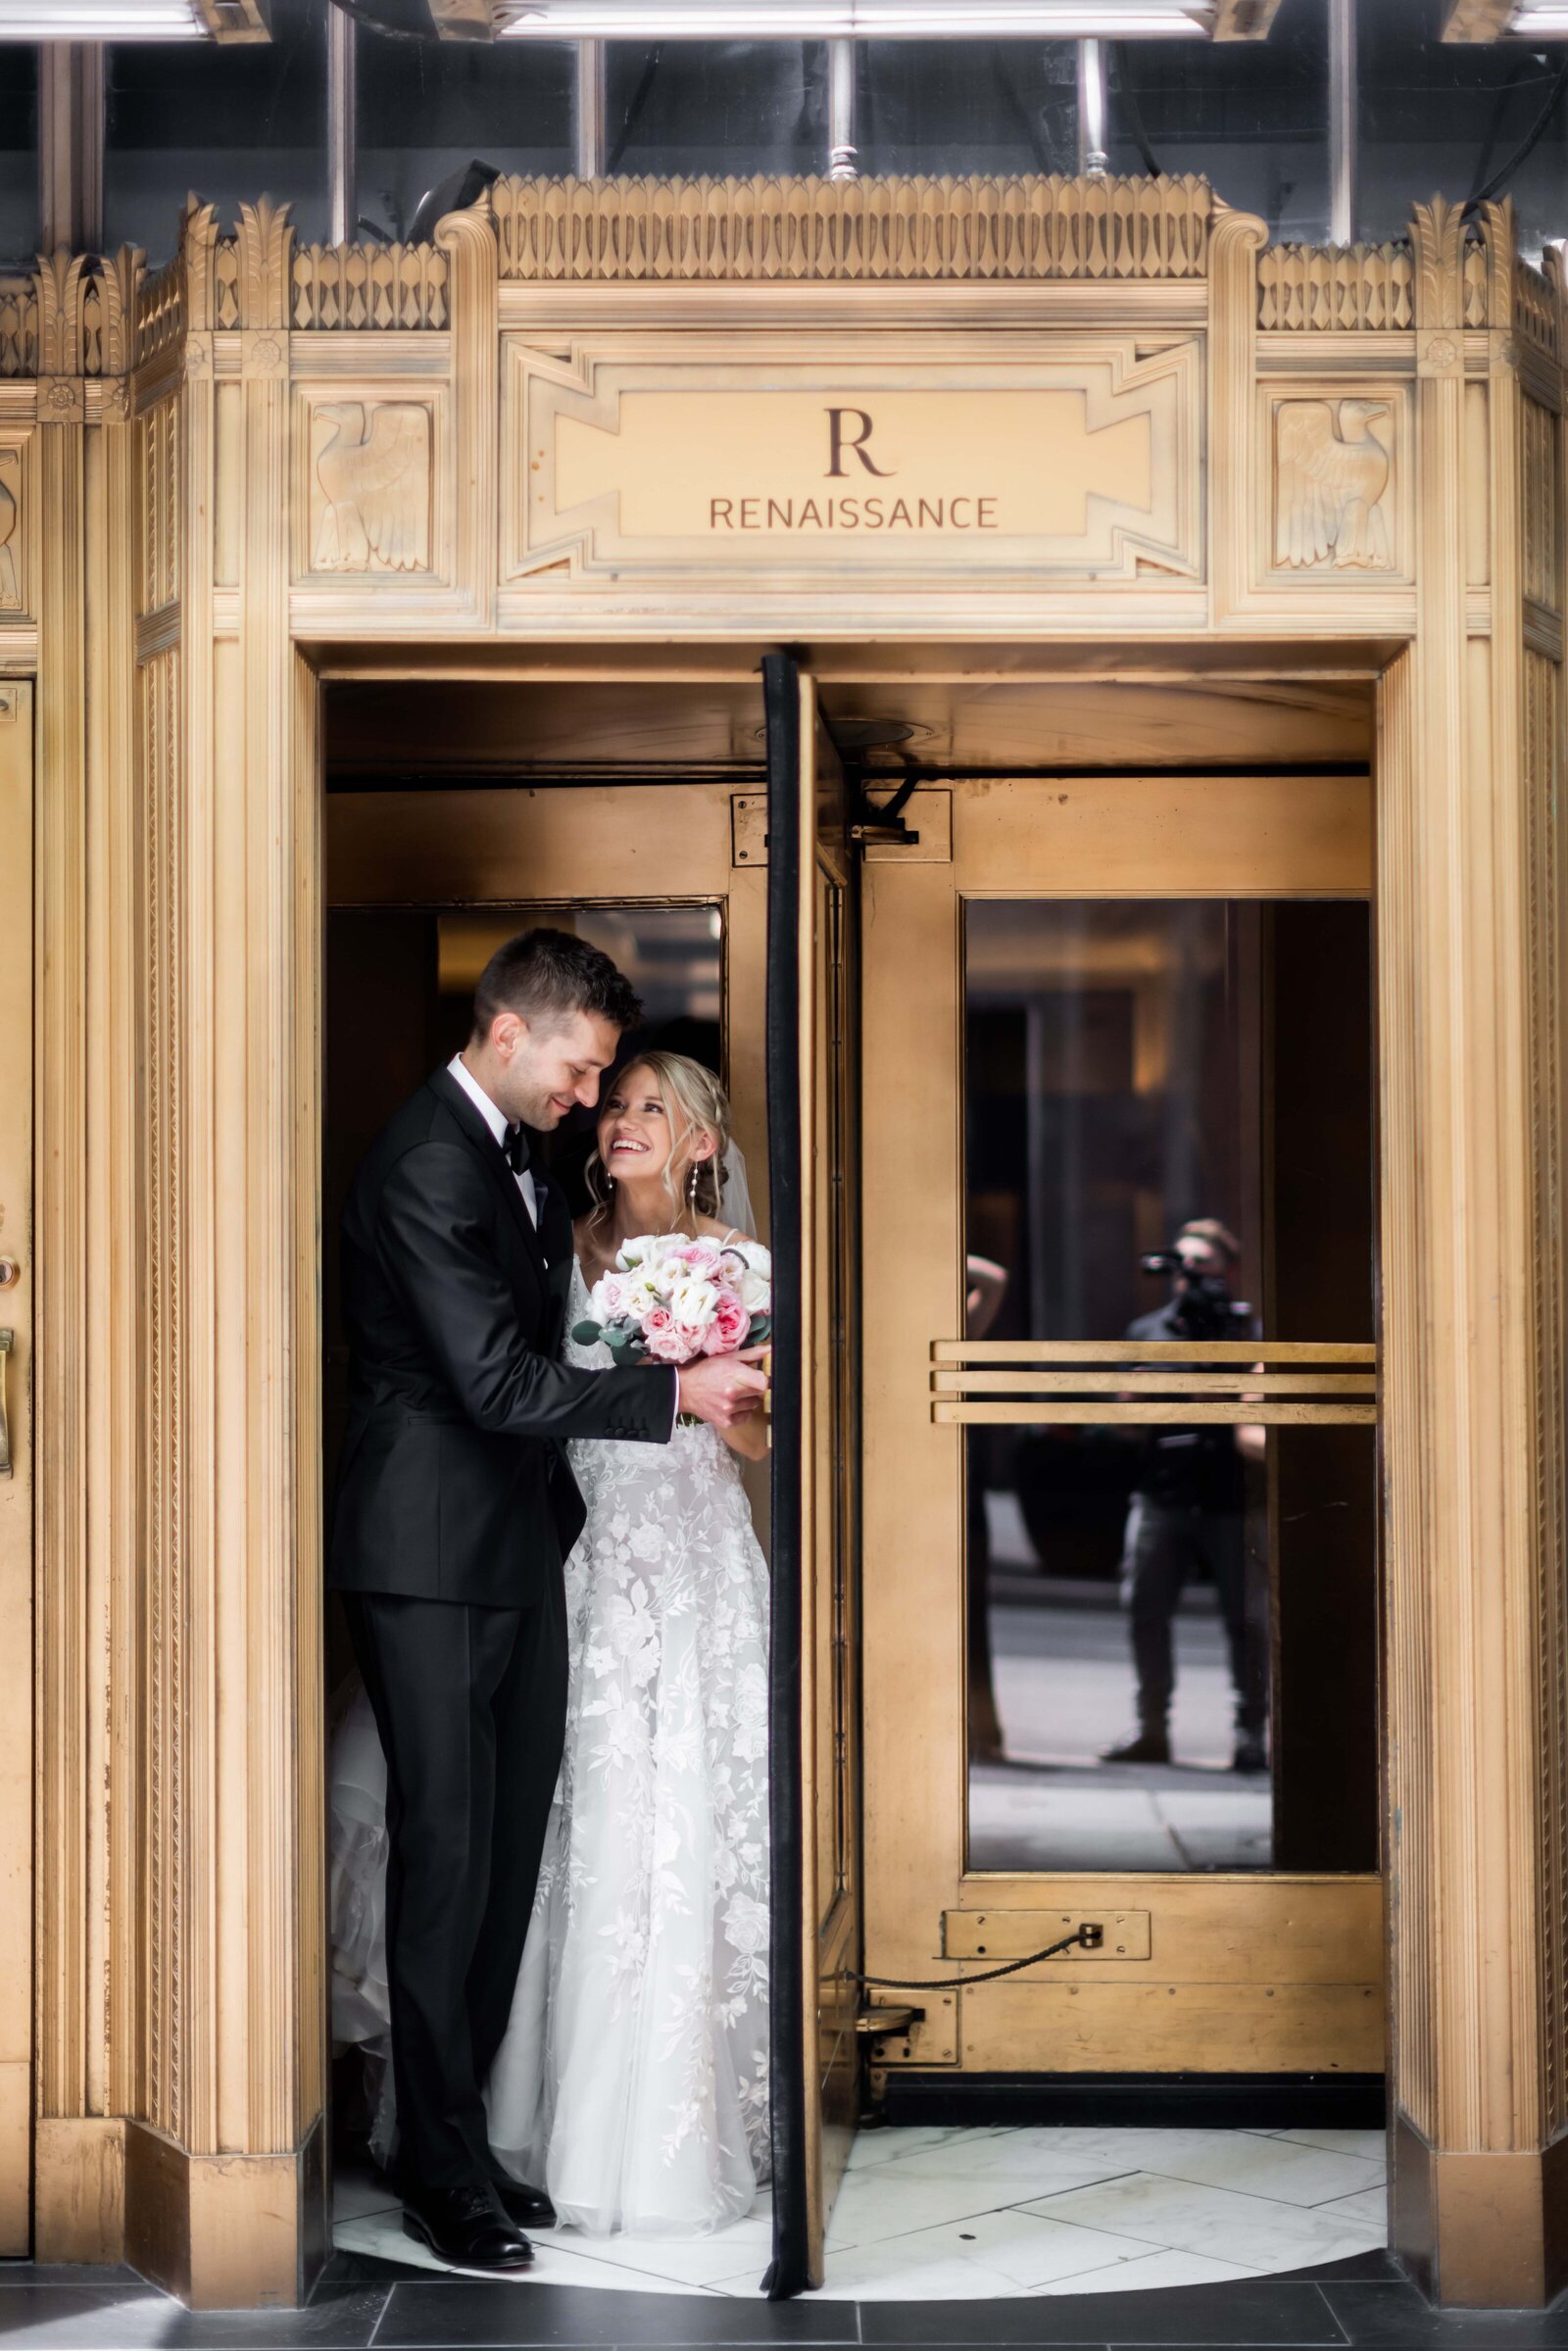 Capture the iconic moment as Hailey and Peter step out of the revolving doors of The Renaissance Hotel, marking the beginning of their new life together. This photograph celebrates the joy and elegance of their wedding day exit, framed by the grandeur of the hotel's architecture. Perfect for couples looking for memorable exit photo inspiration, this image exemplifies a blend of modern elegance and timeless romance.